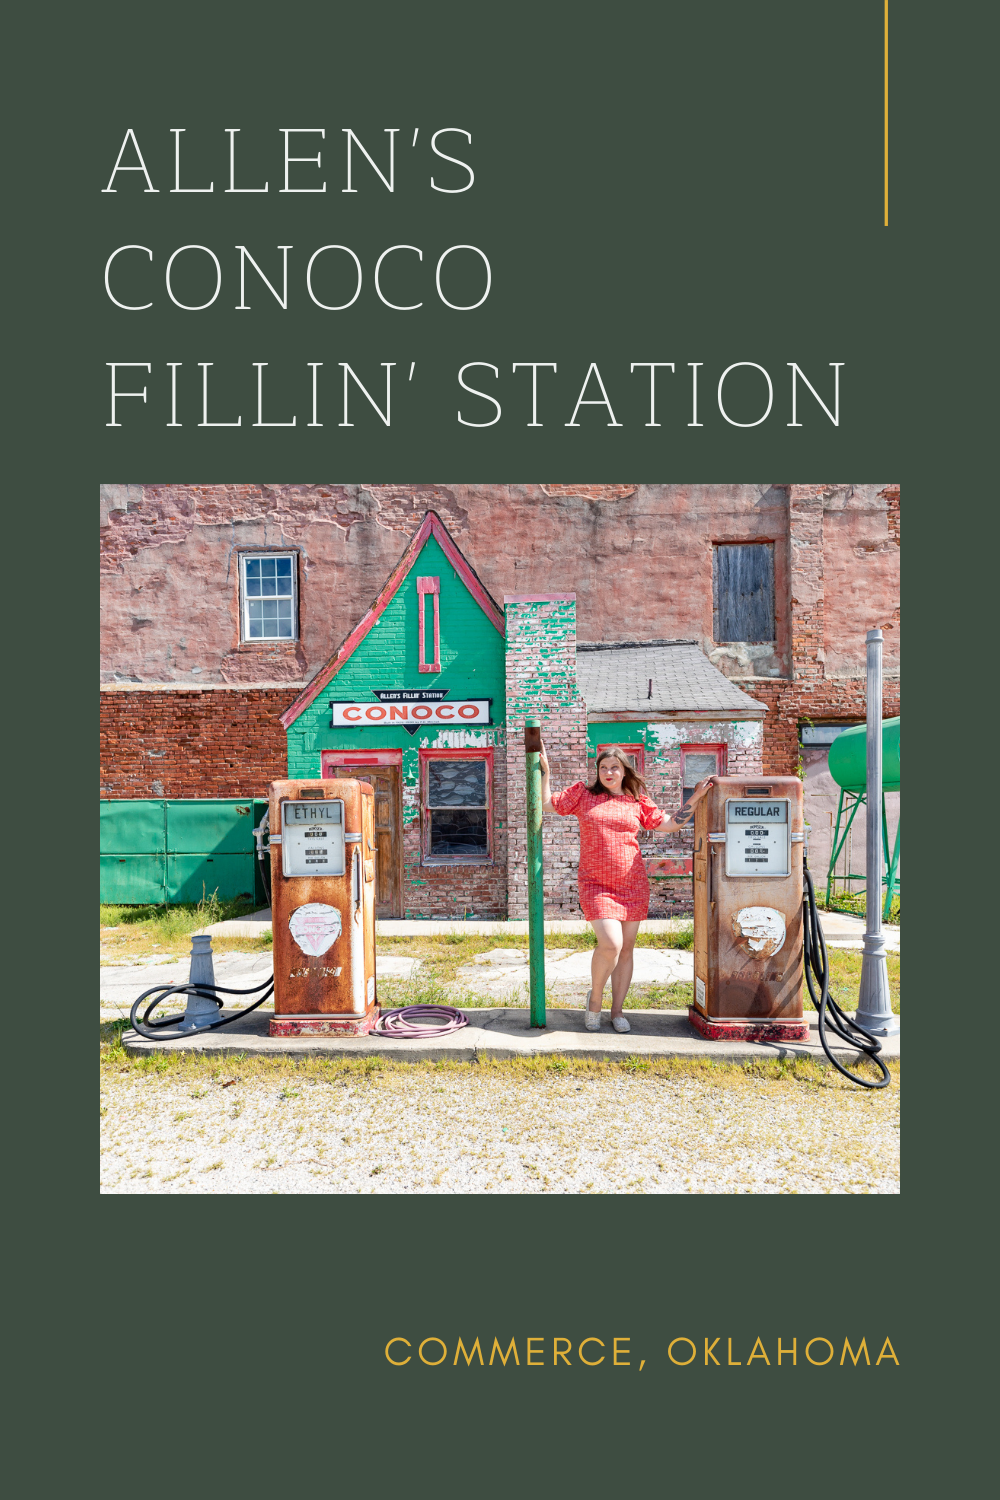 Allen's Conoco Fillin' Station in Commerce, Oklahoma is a Route 66 gem. While you won't be able to fill up your tank, you will get your fill of nostalgia for the glory days of the Mother Road at this vintage service station. #Route66 #Route66RoadTrip #OklahomaRoadsideAttractions #OklahomaRoadsideAttraction #RoadsideAttractions #RoadsideAttraction #RoadTrip #OklahomaRoadTrip #OklahomaRoadTripBucketLists #OklahomaBucketList #OklahomaRoadTripThingstoDo #OklahomaRoadTripIdeas 